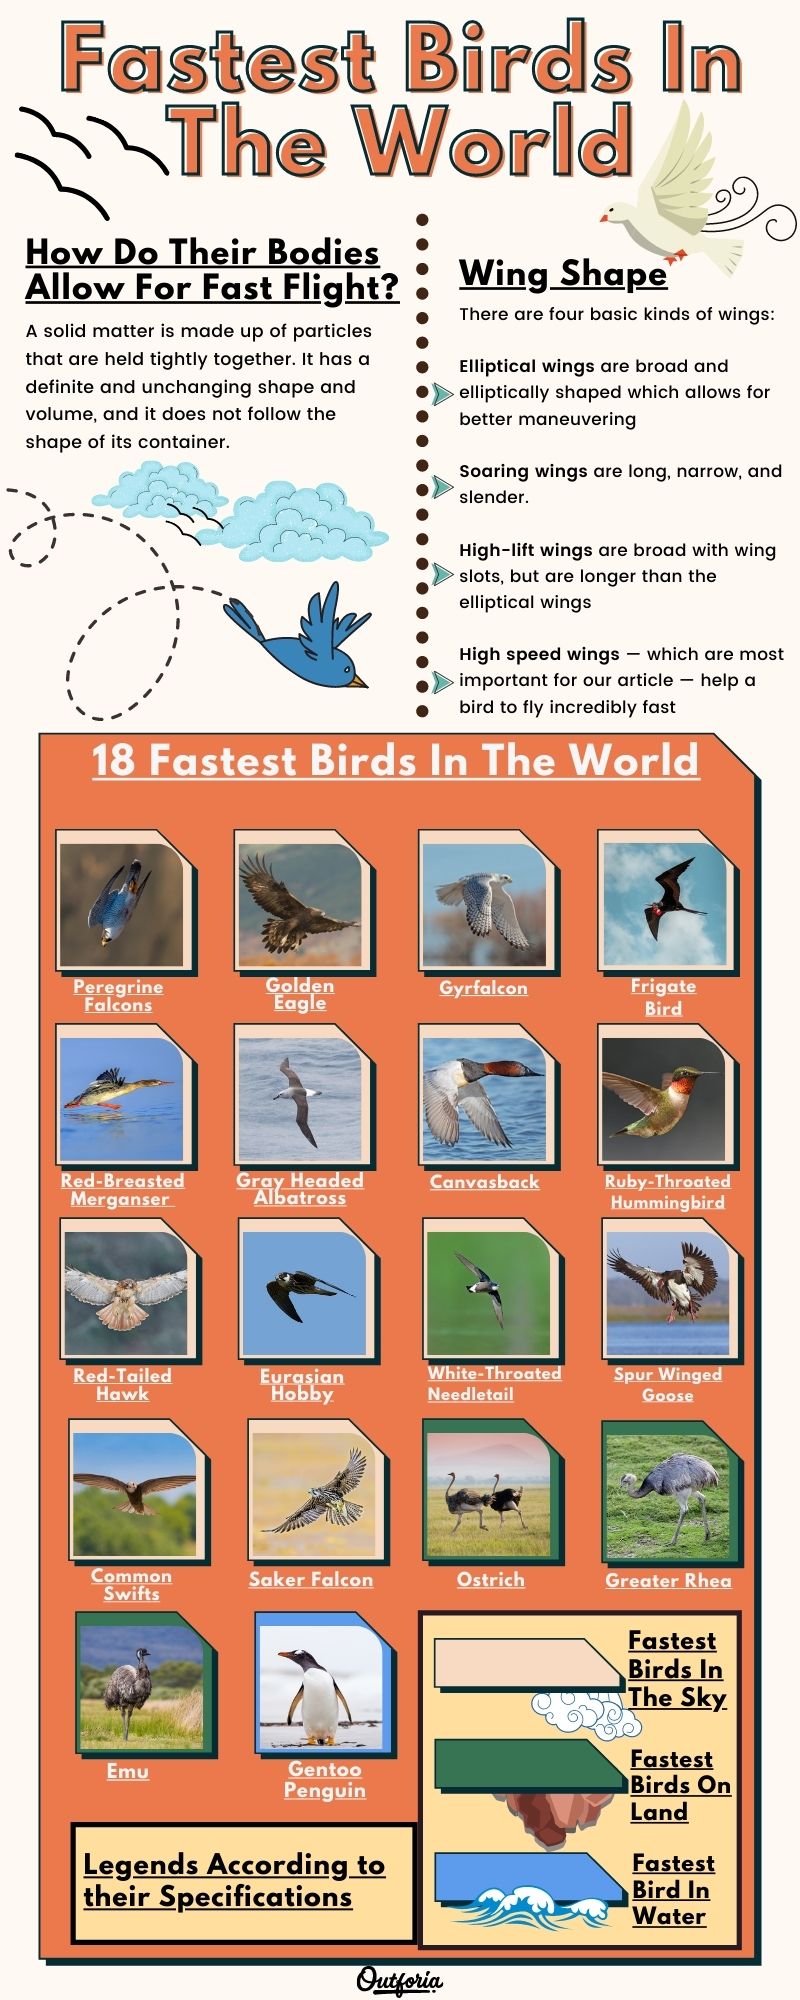 Chart of Fastest birds in the world complete with photos, facts, and more